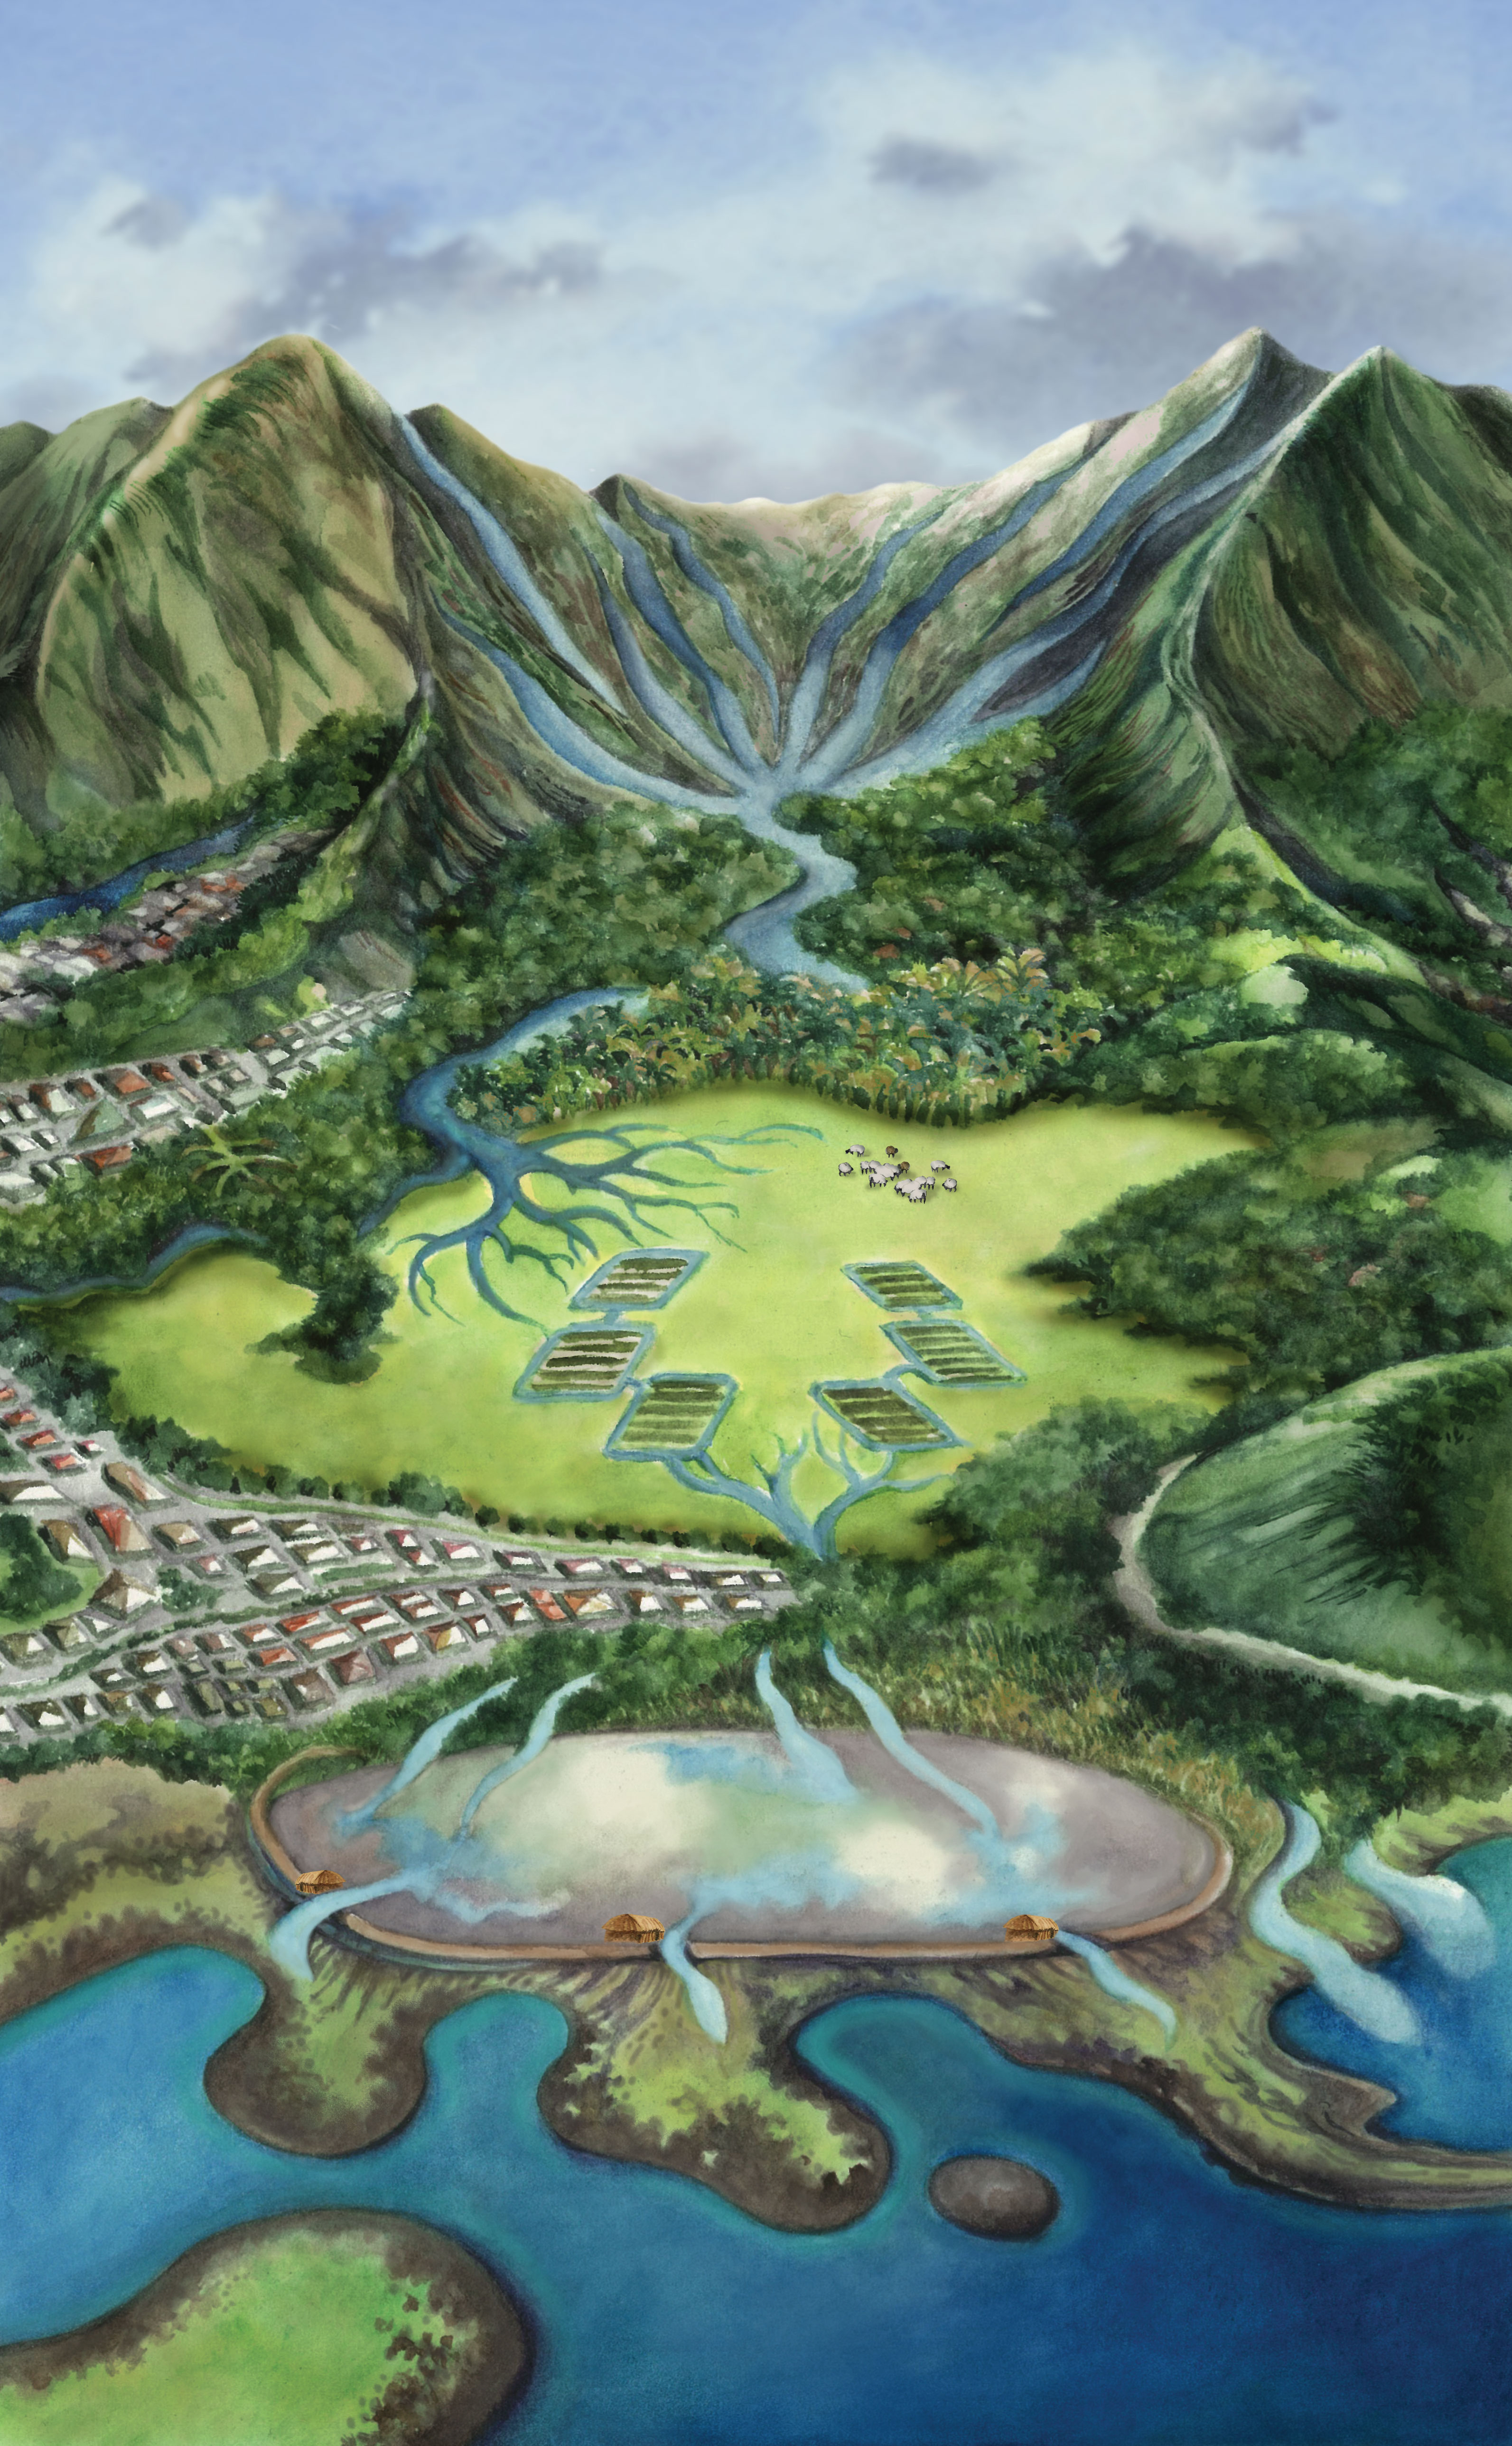 Illustration of He‘eia ahupua‘a with eight streams flowing from the mountains and converging into one before flowing through the wetlands, taro fields and fishpond and into the sea.